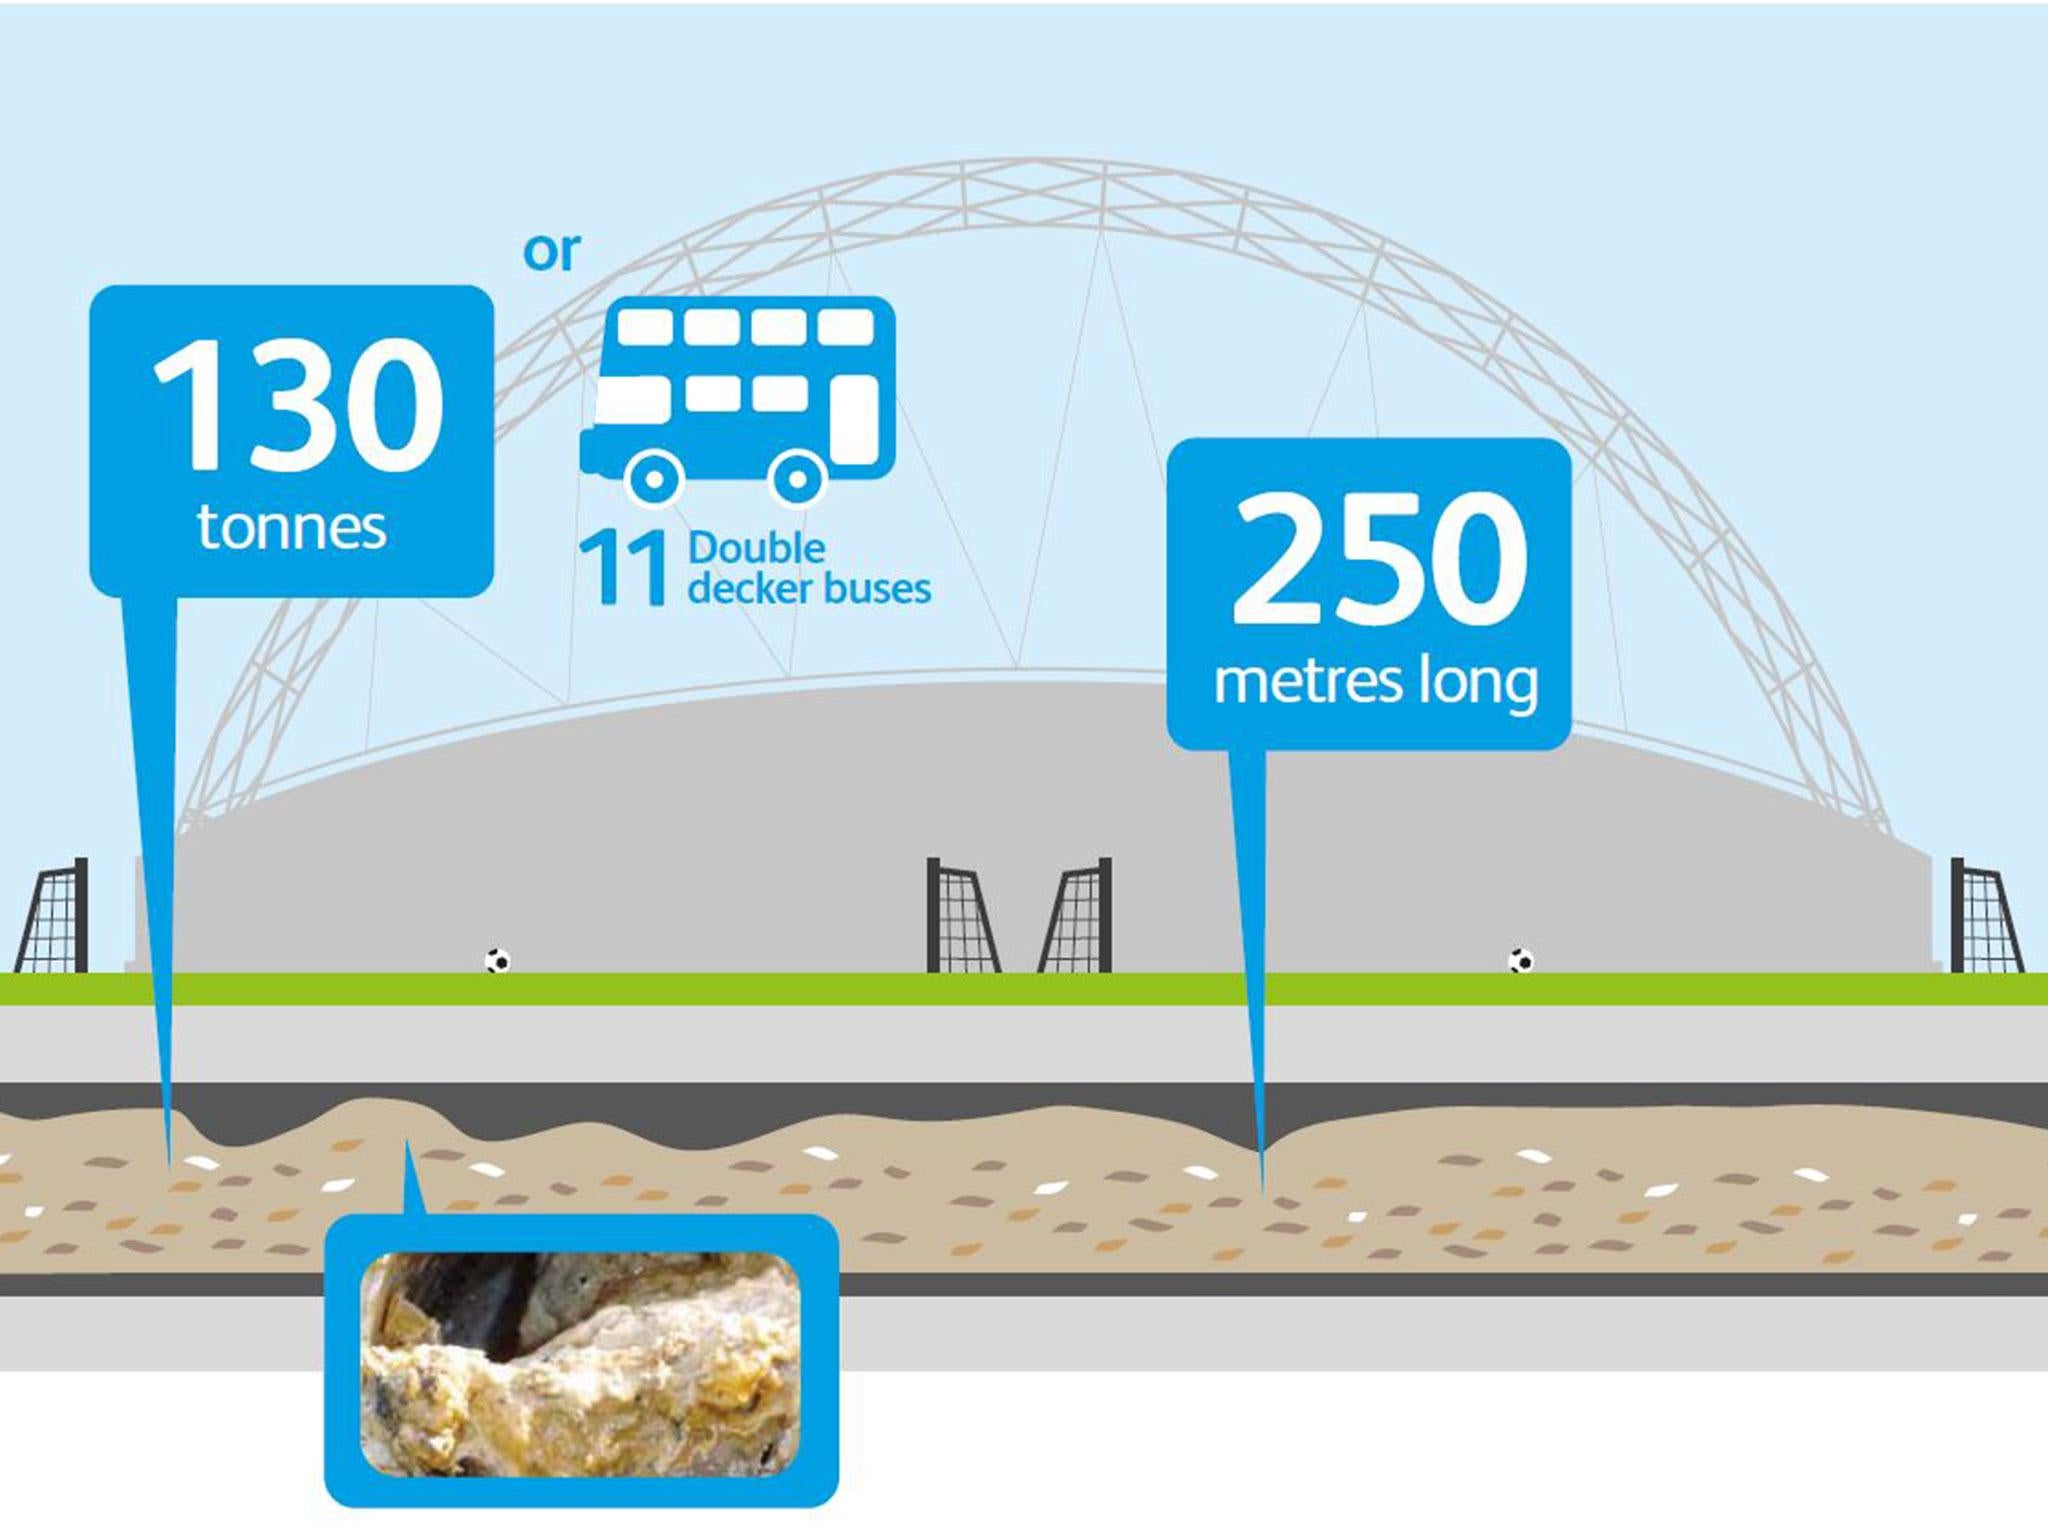 The fatberg is around the length of two Wembley Stadium football pitches